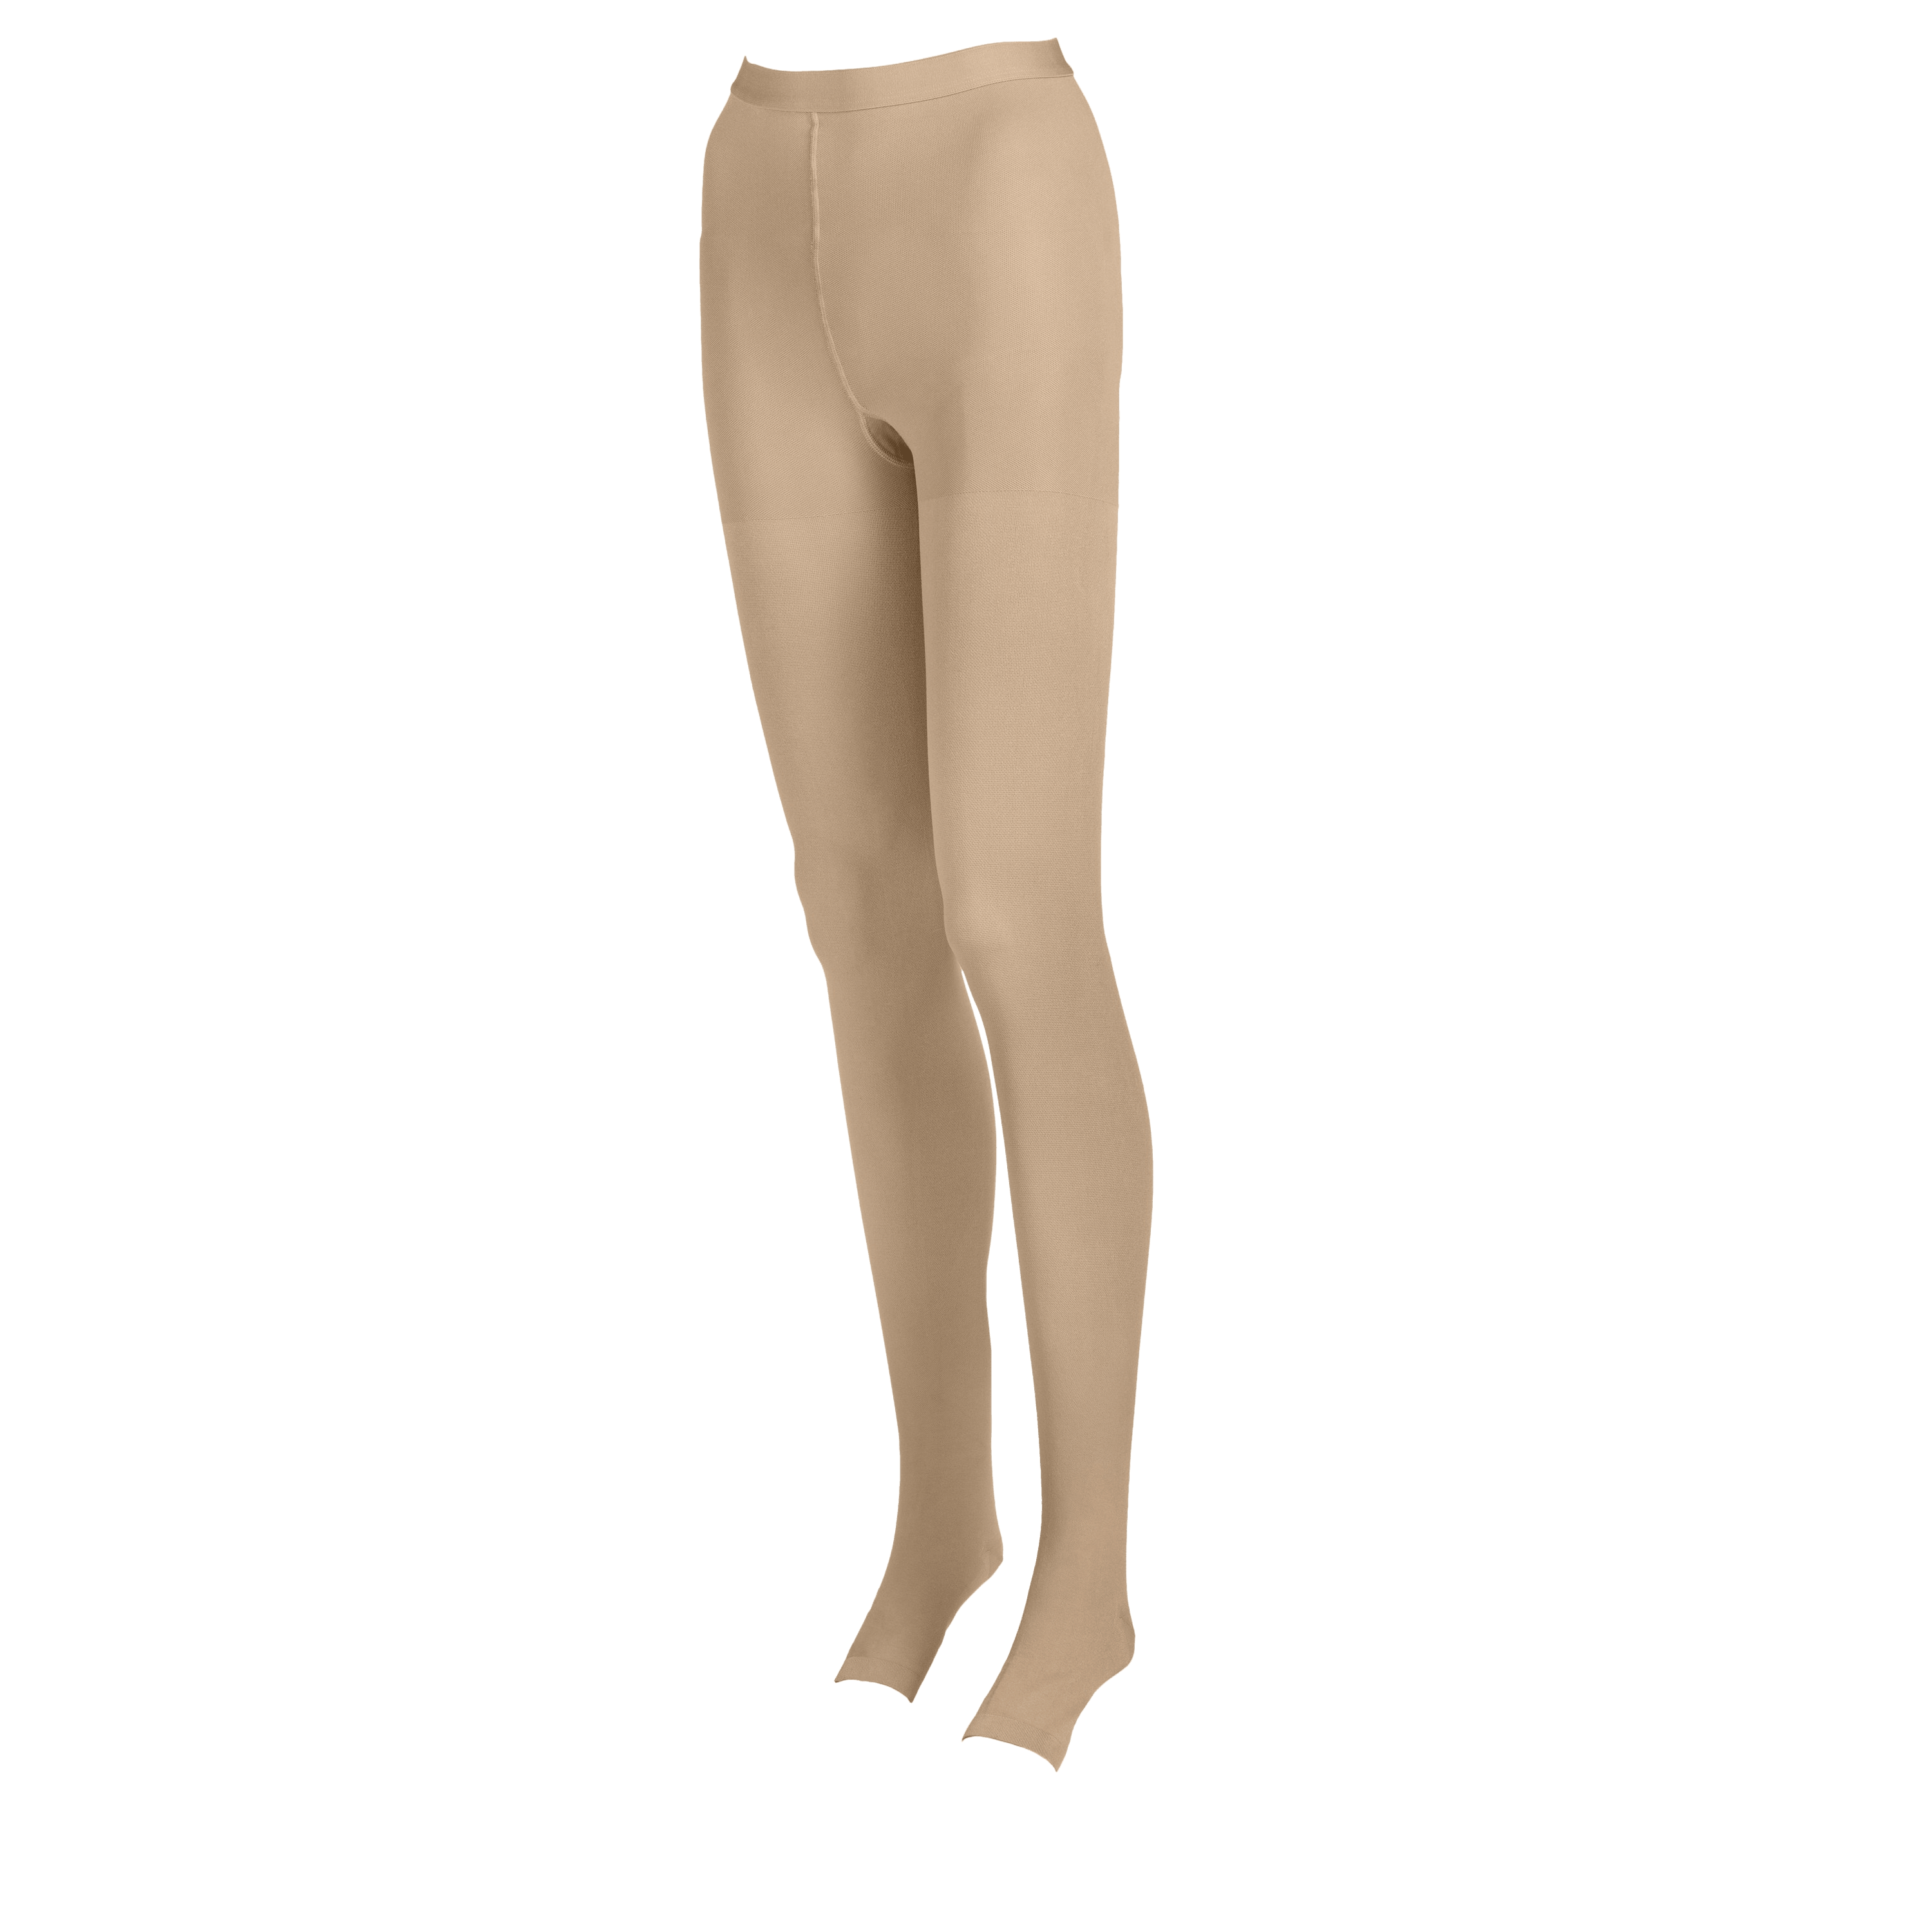 Plus Size Opaque Compression Tights for Women 20-30 mmHg - Beige, 2X-Large